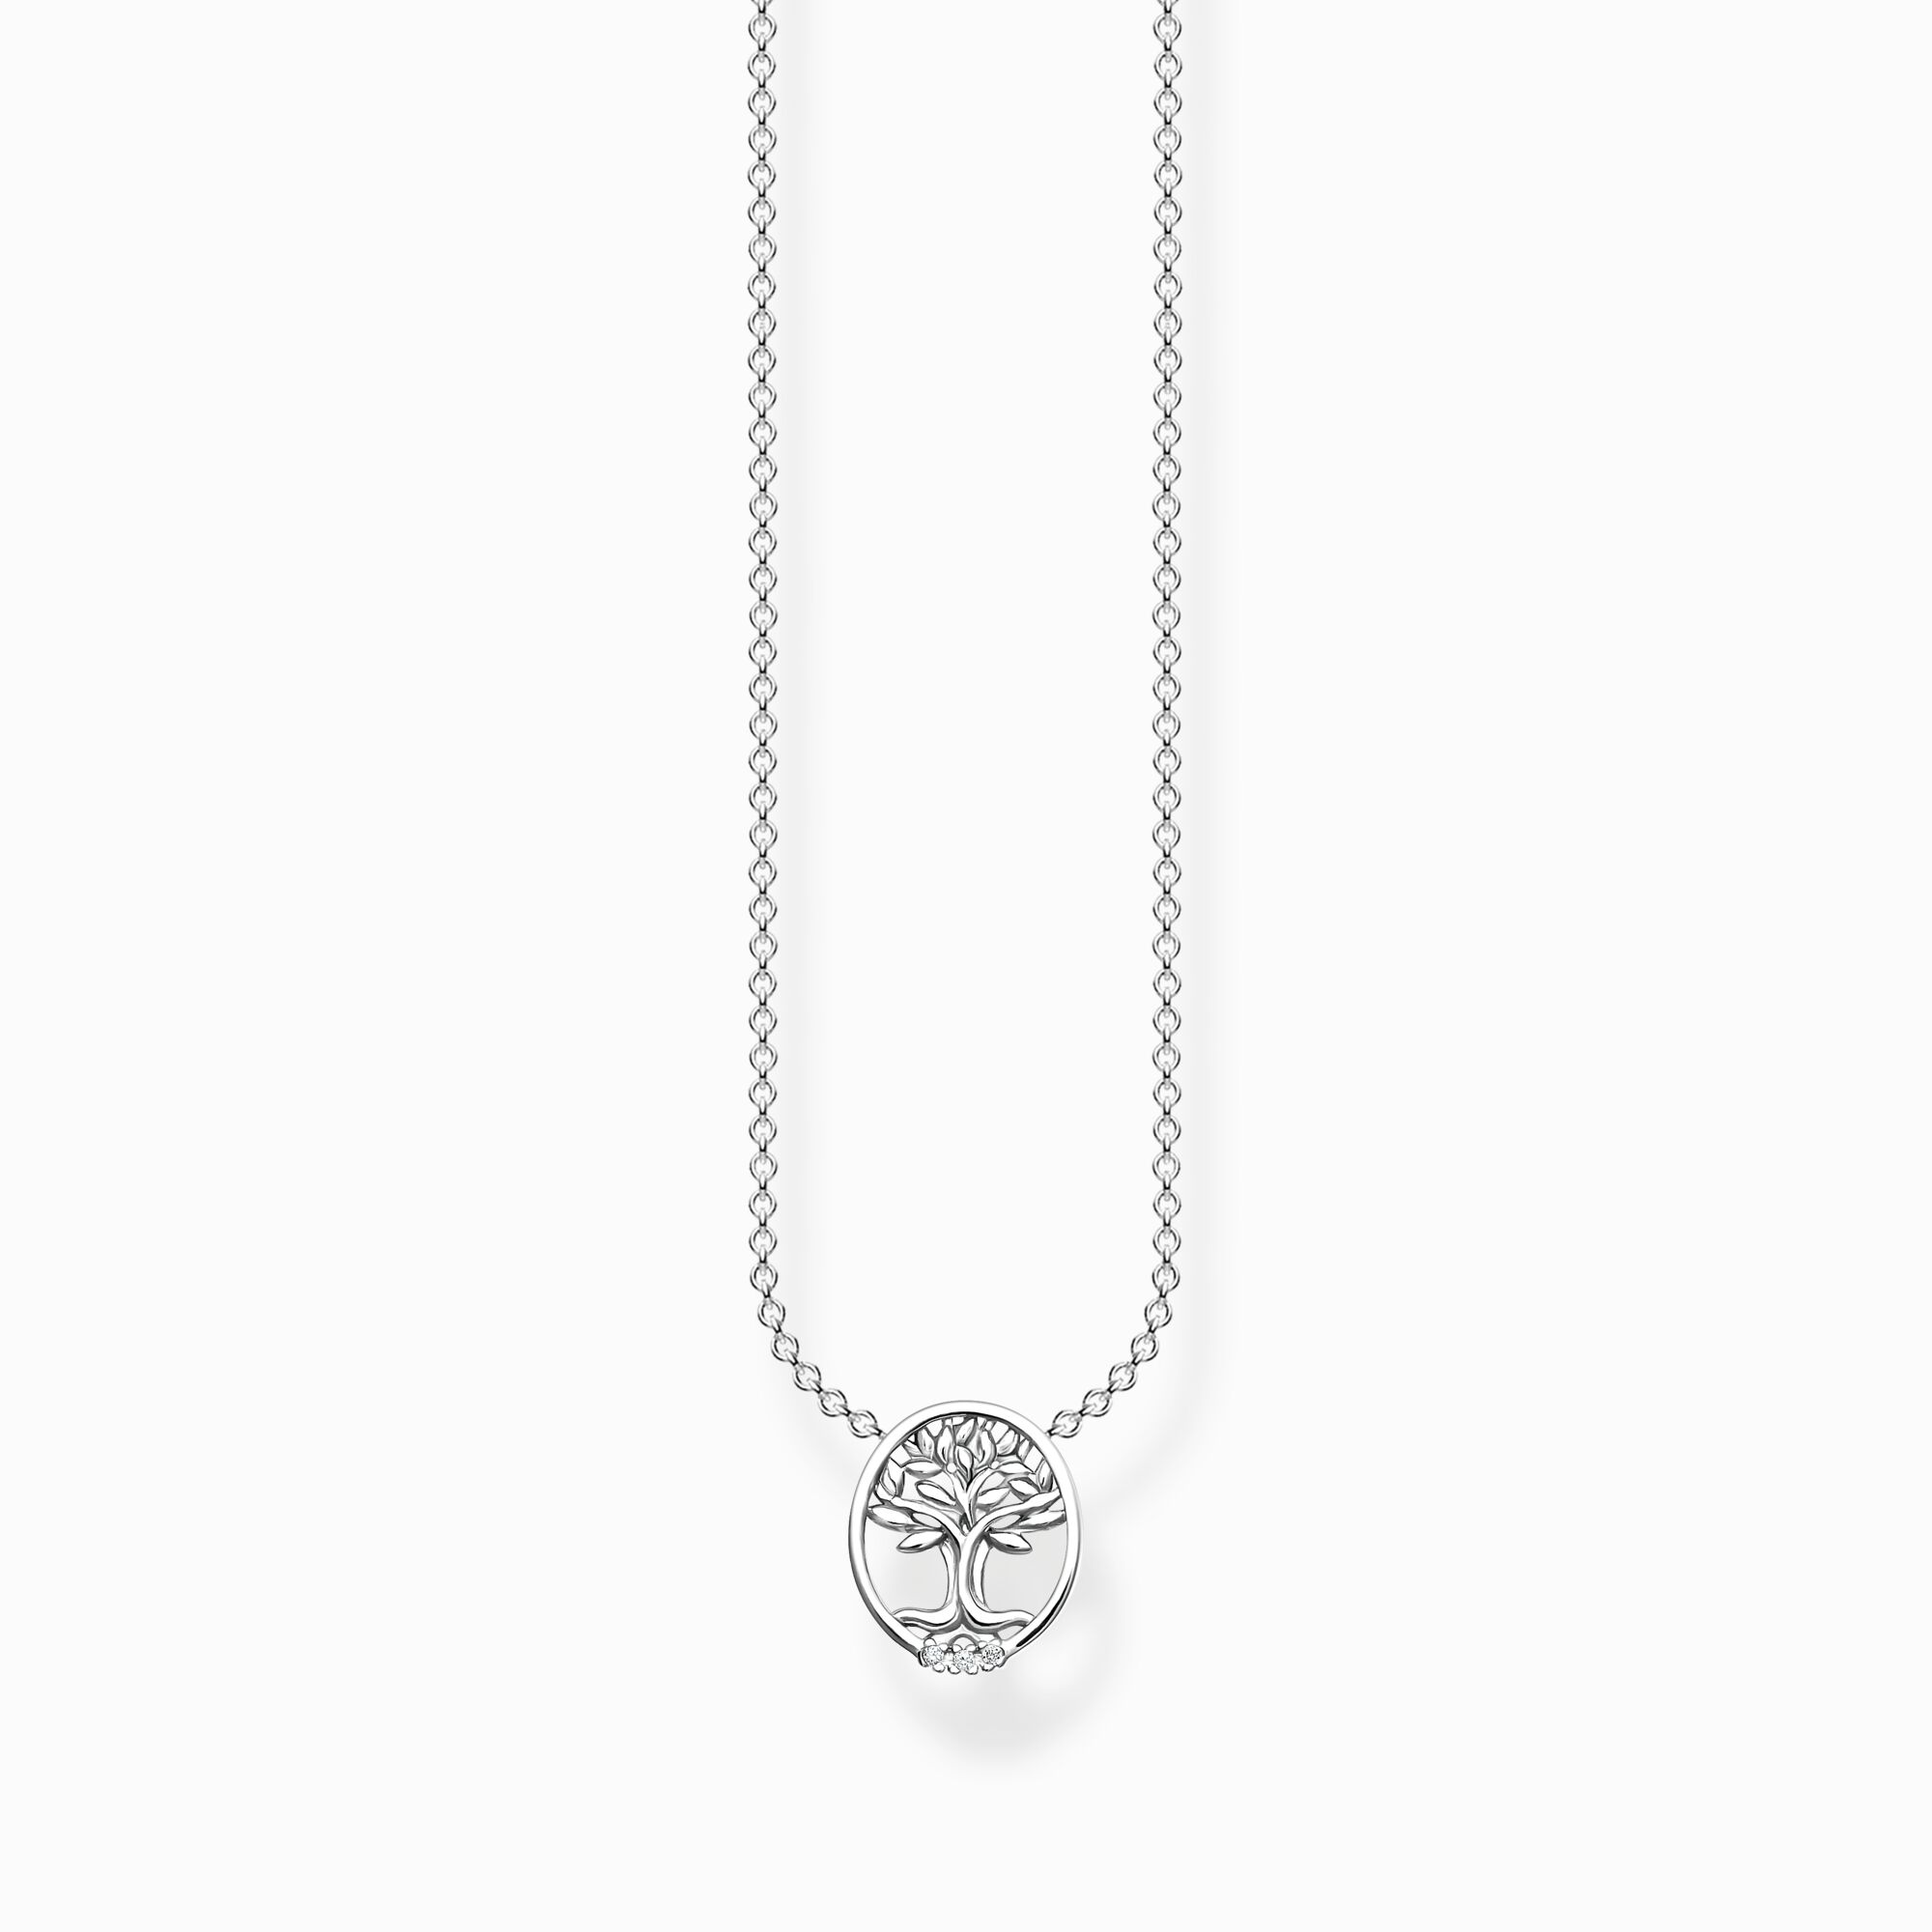 Necklace Tree of Love with white stones silver from the Charming Collection collection in the THOMAS SABO online store